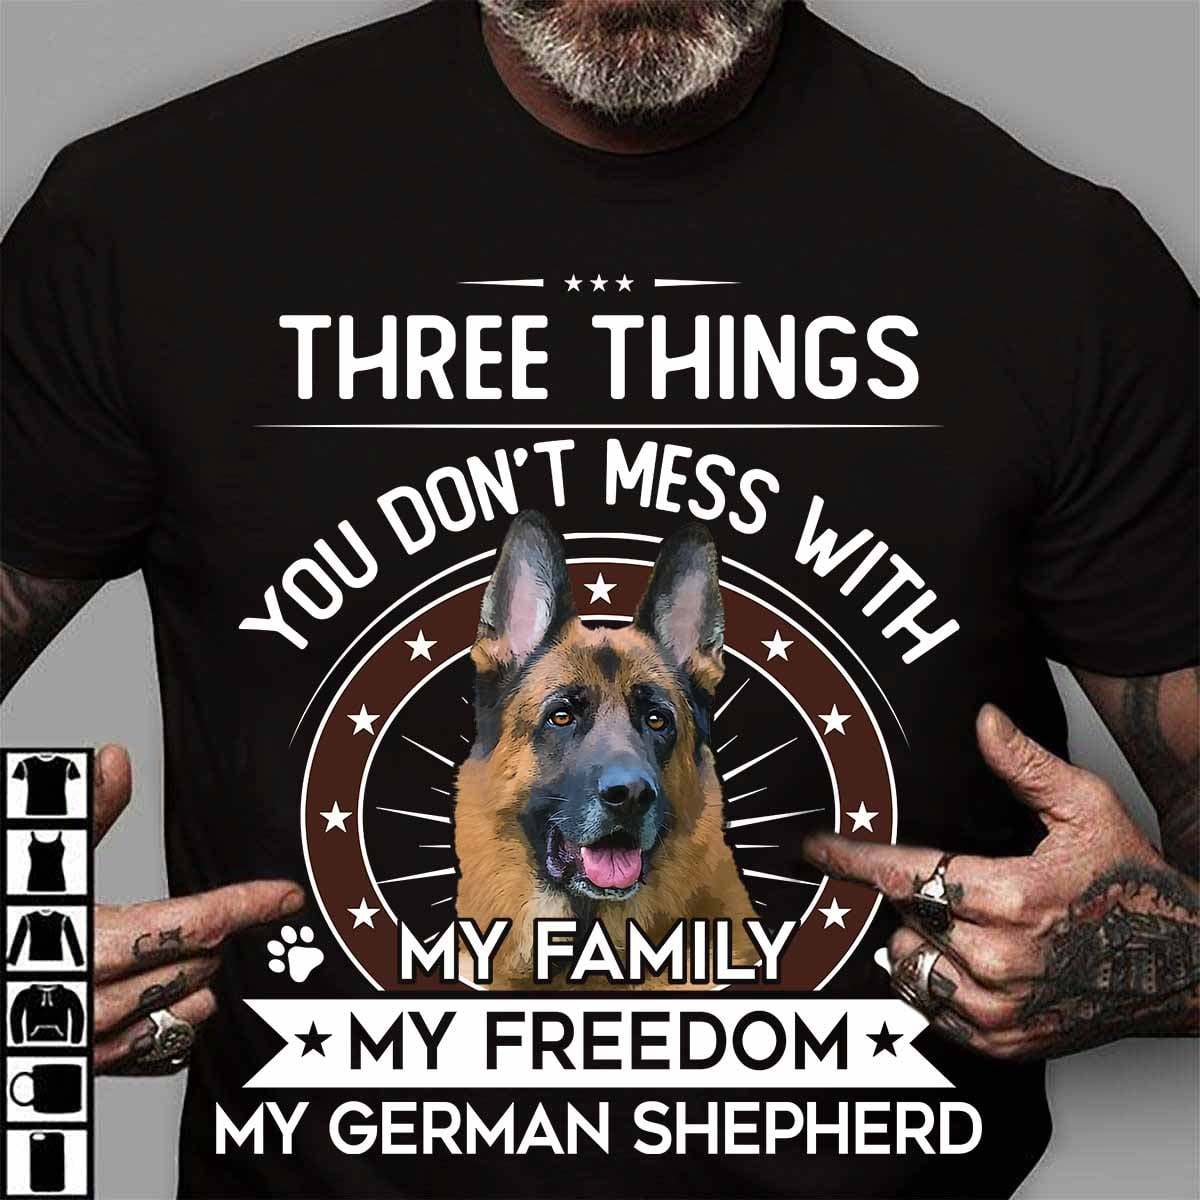 Three things you don't mess with - My family, my freedom, my german shepherd